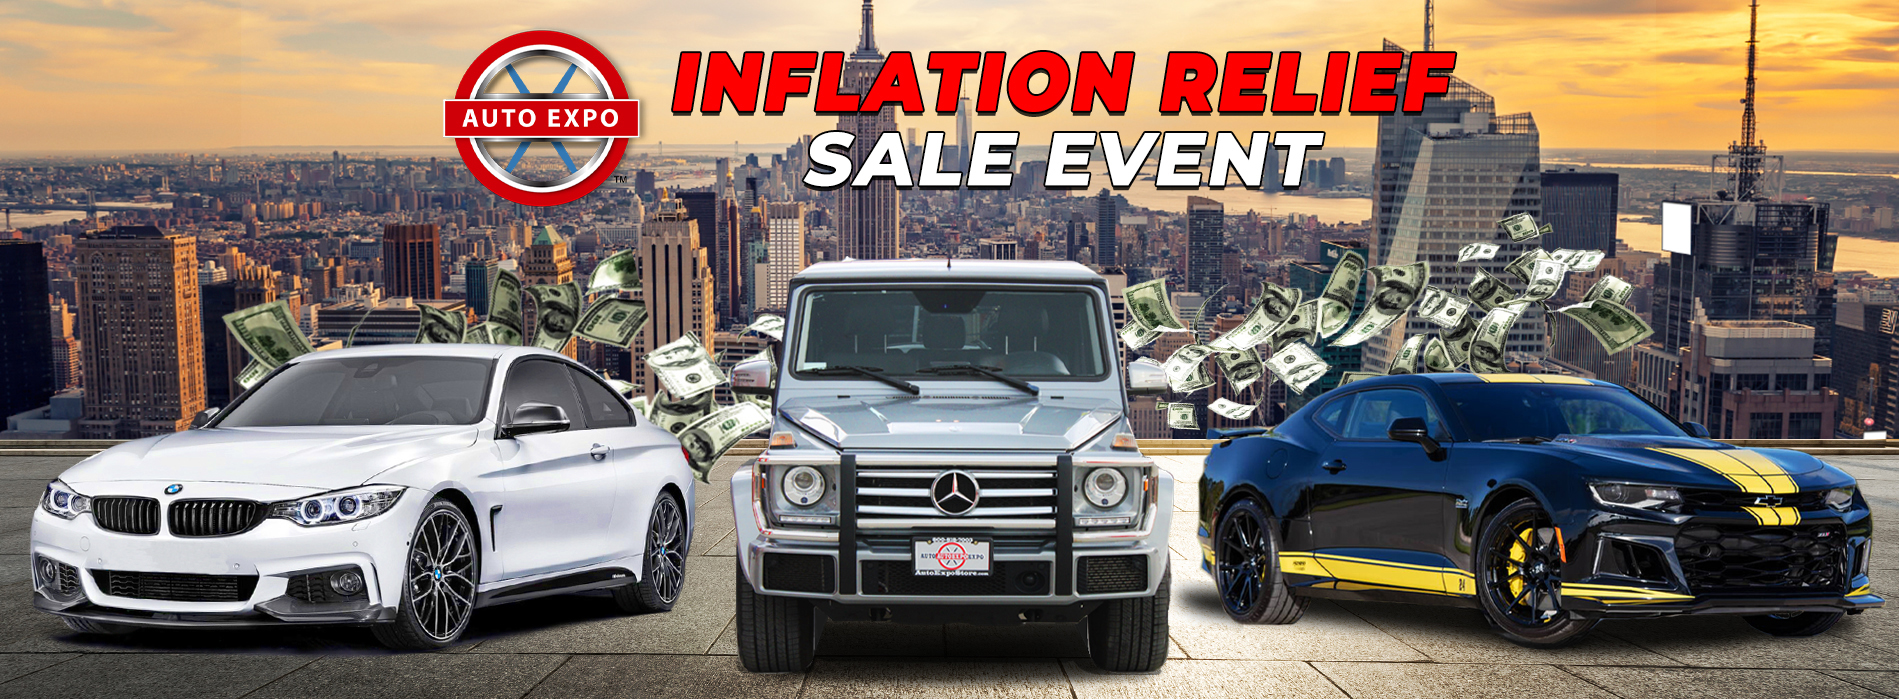 Inflation relief sale event